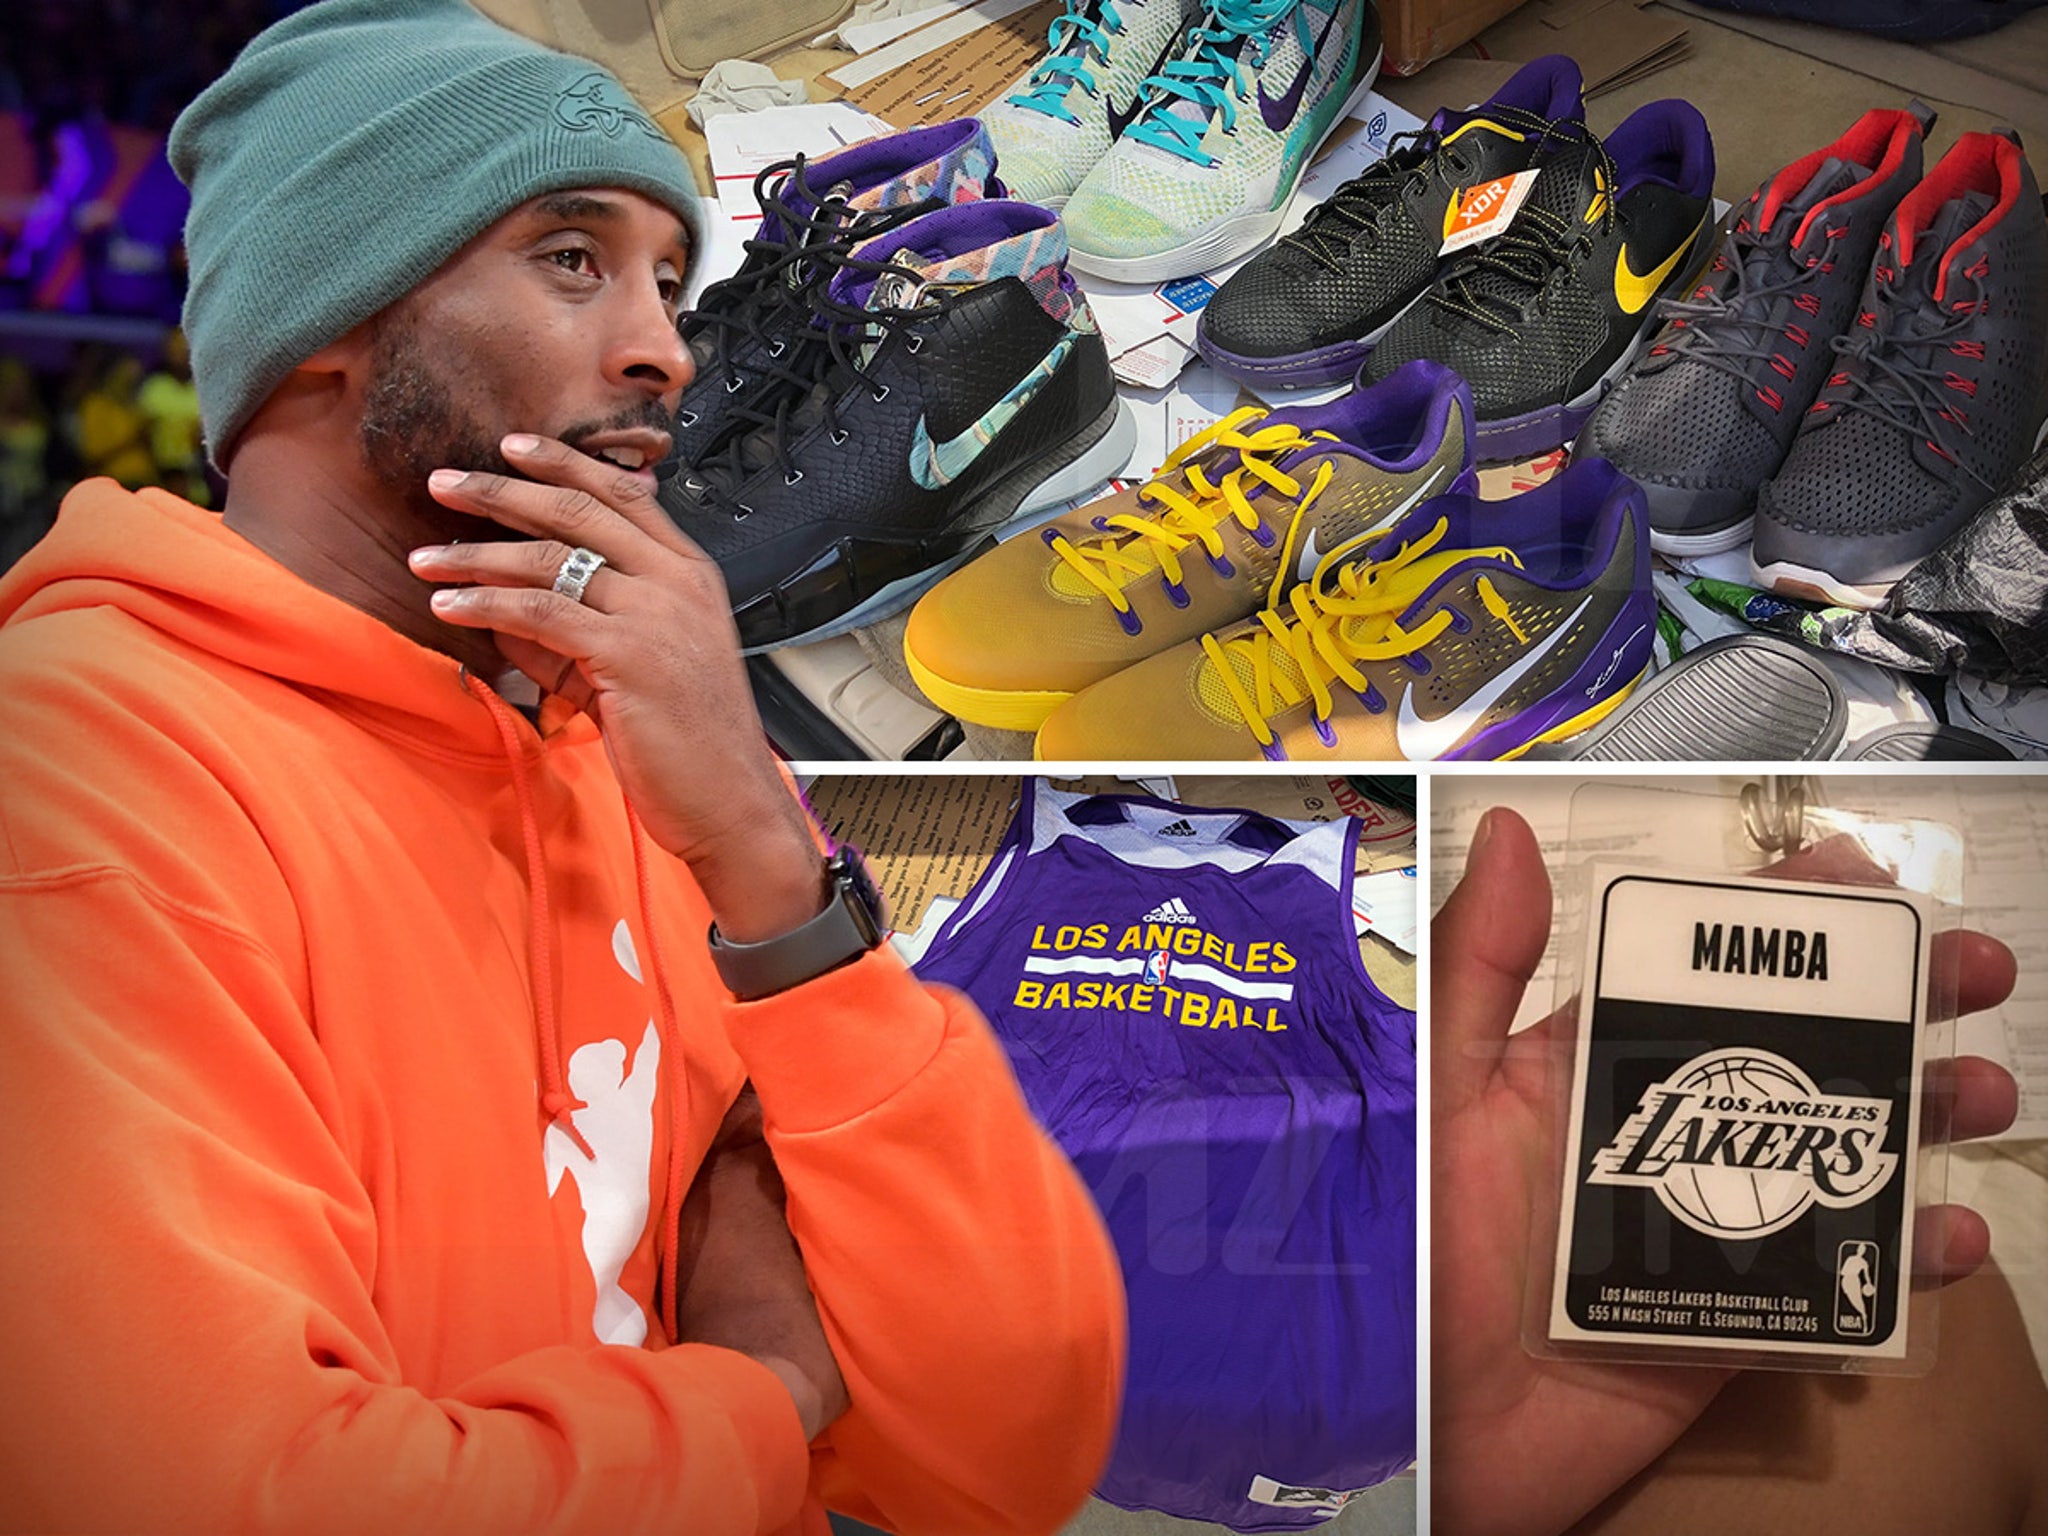 Disputed auction of Kobe Bryant's items nets more than $400,000